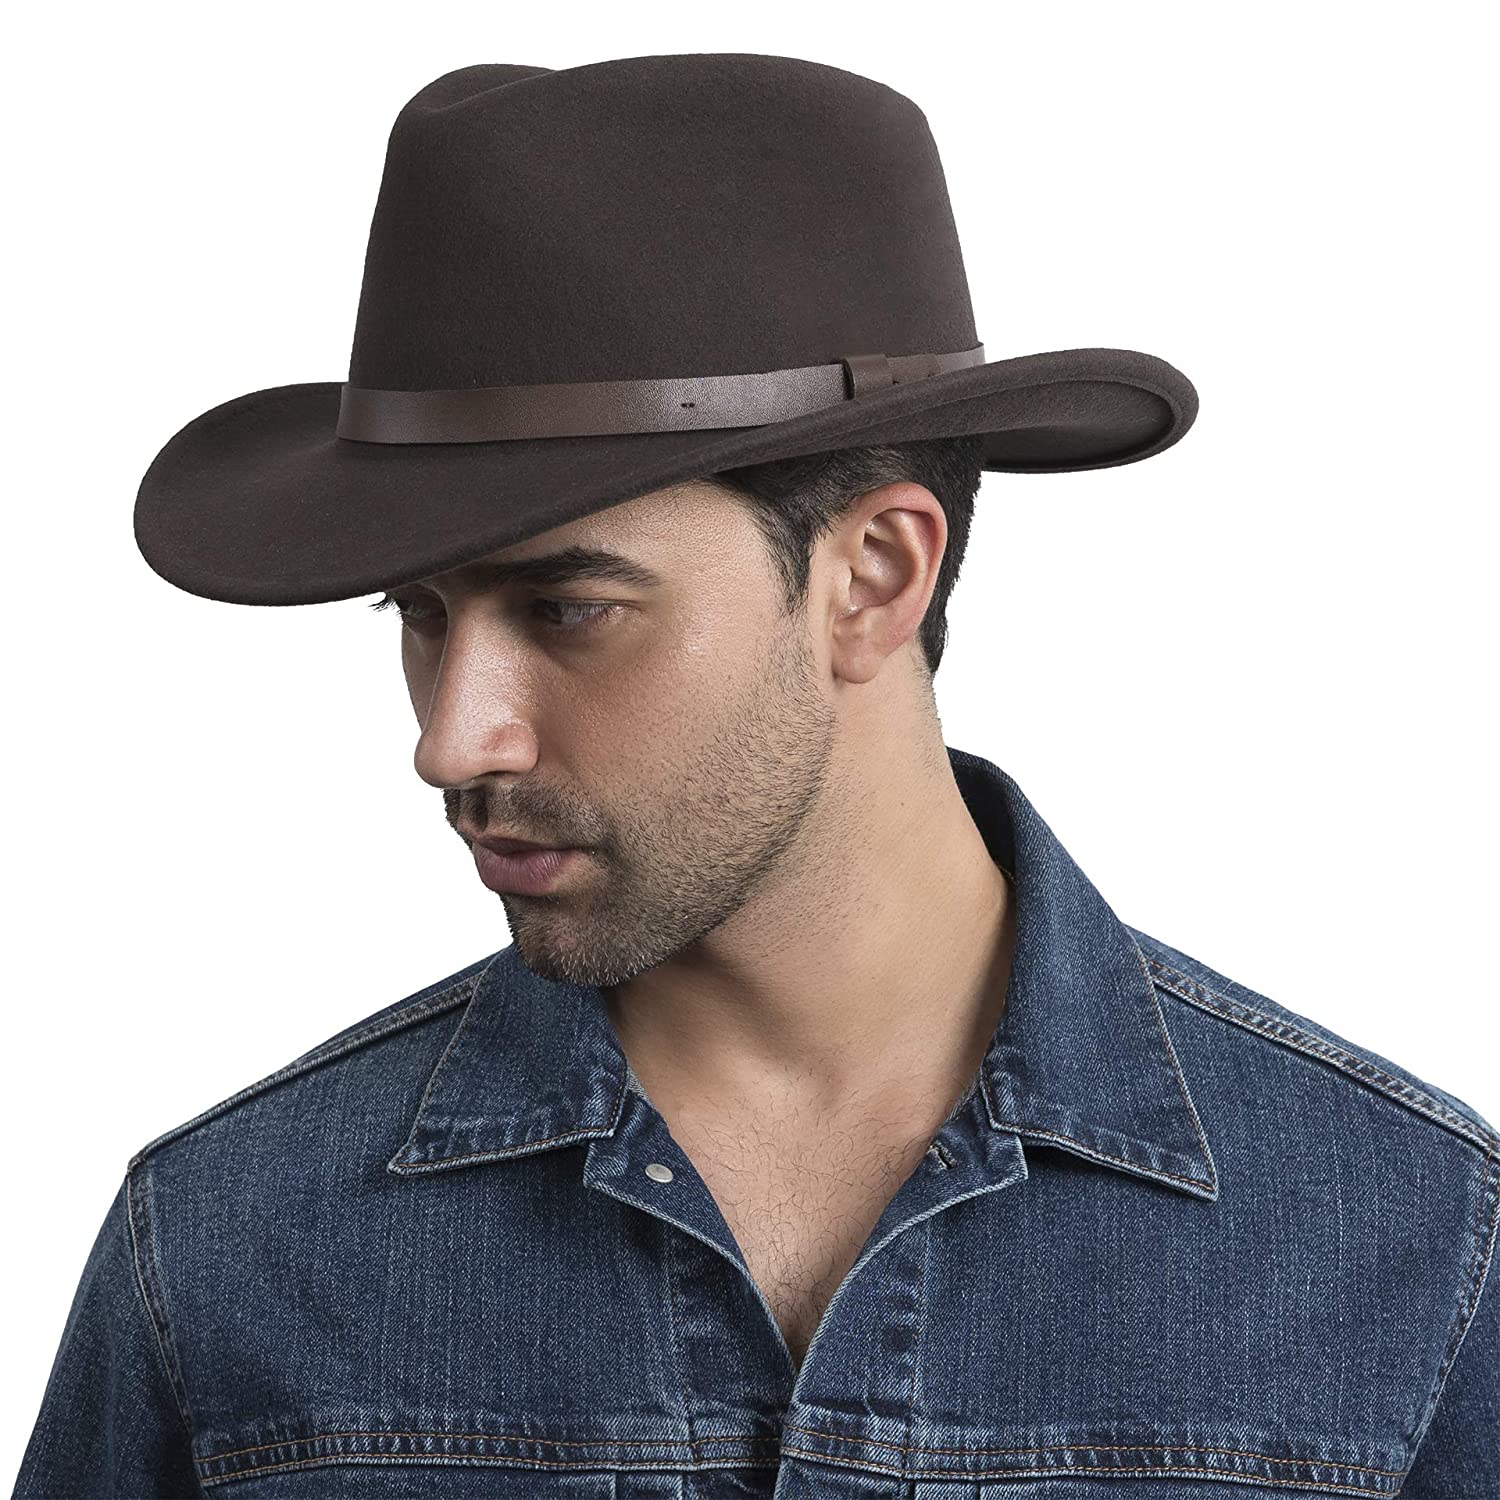 Things to Keep in Mind While Styling Your Cowboy Hat